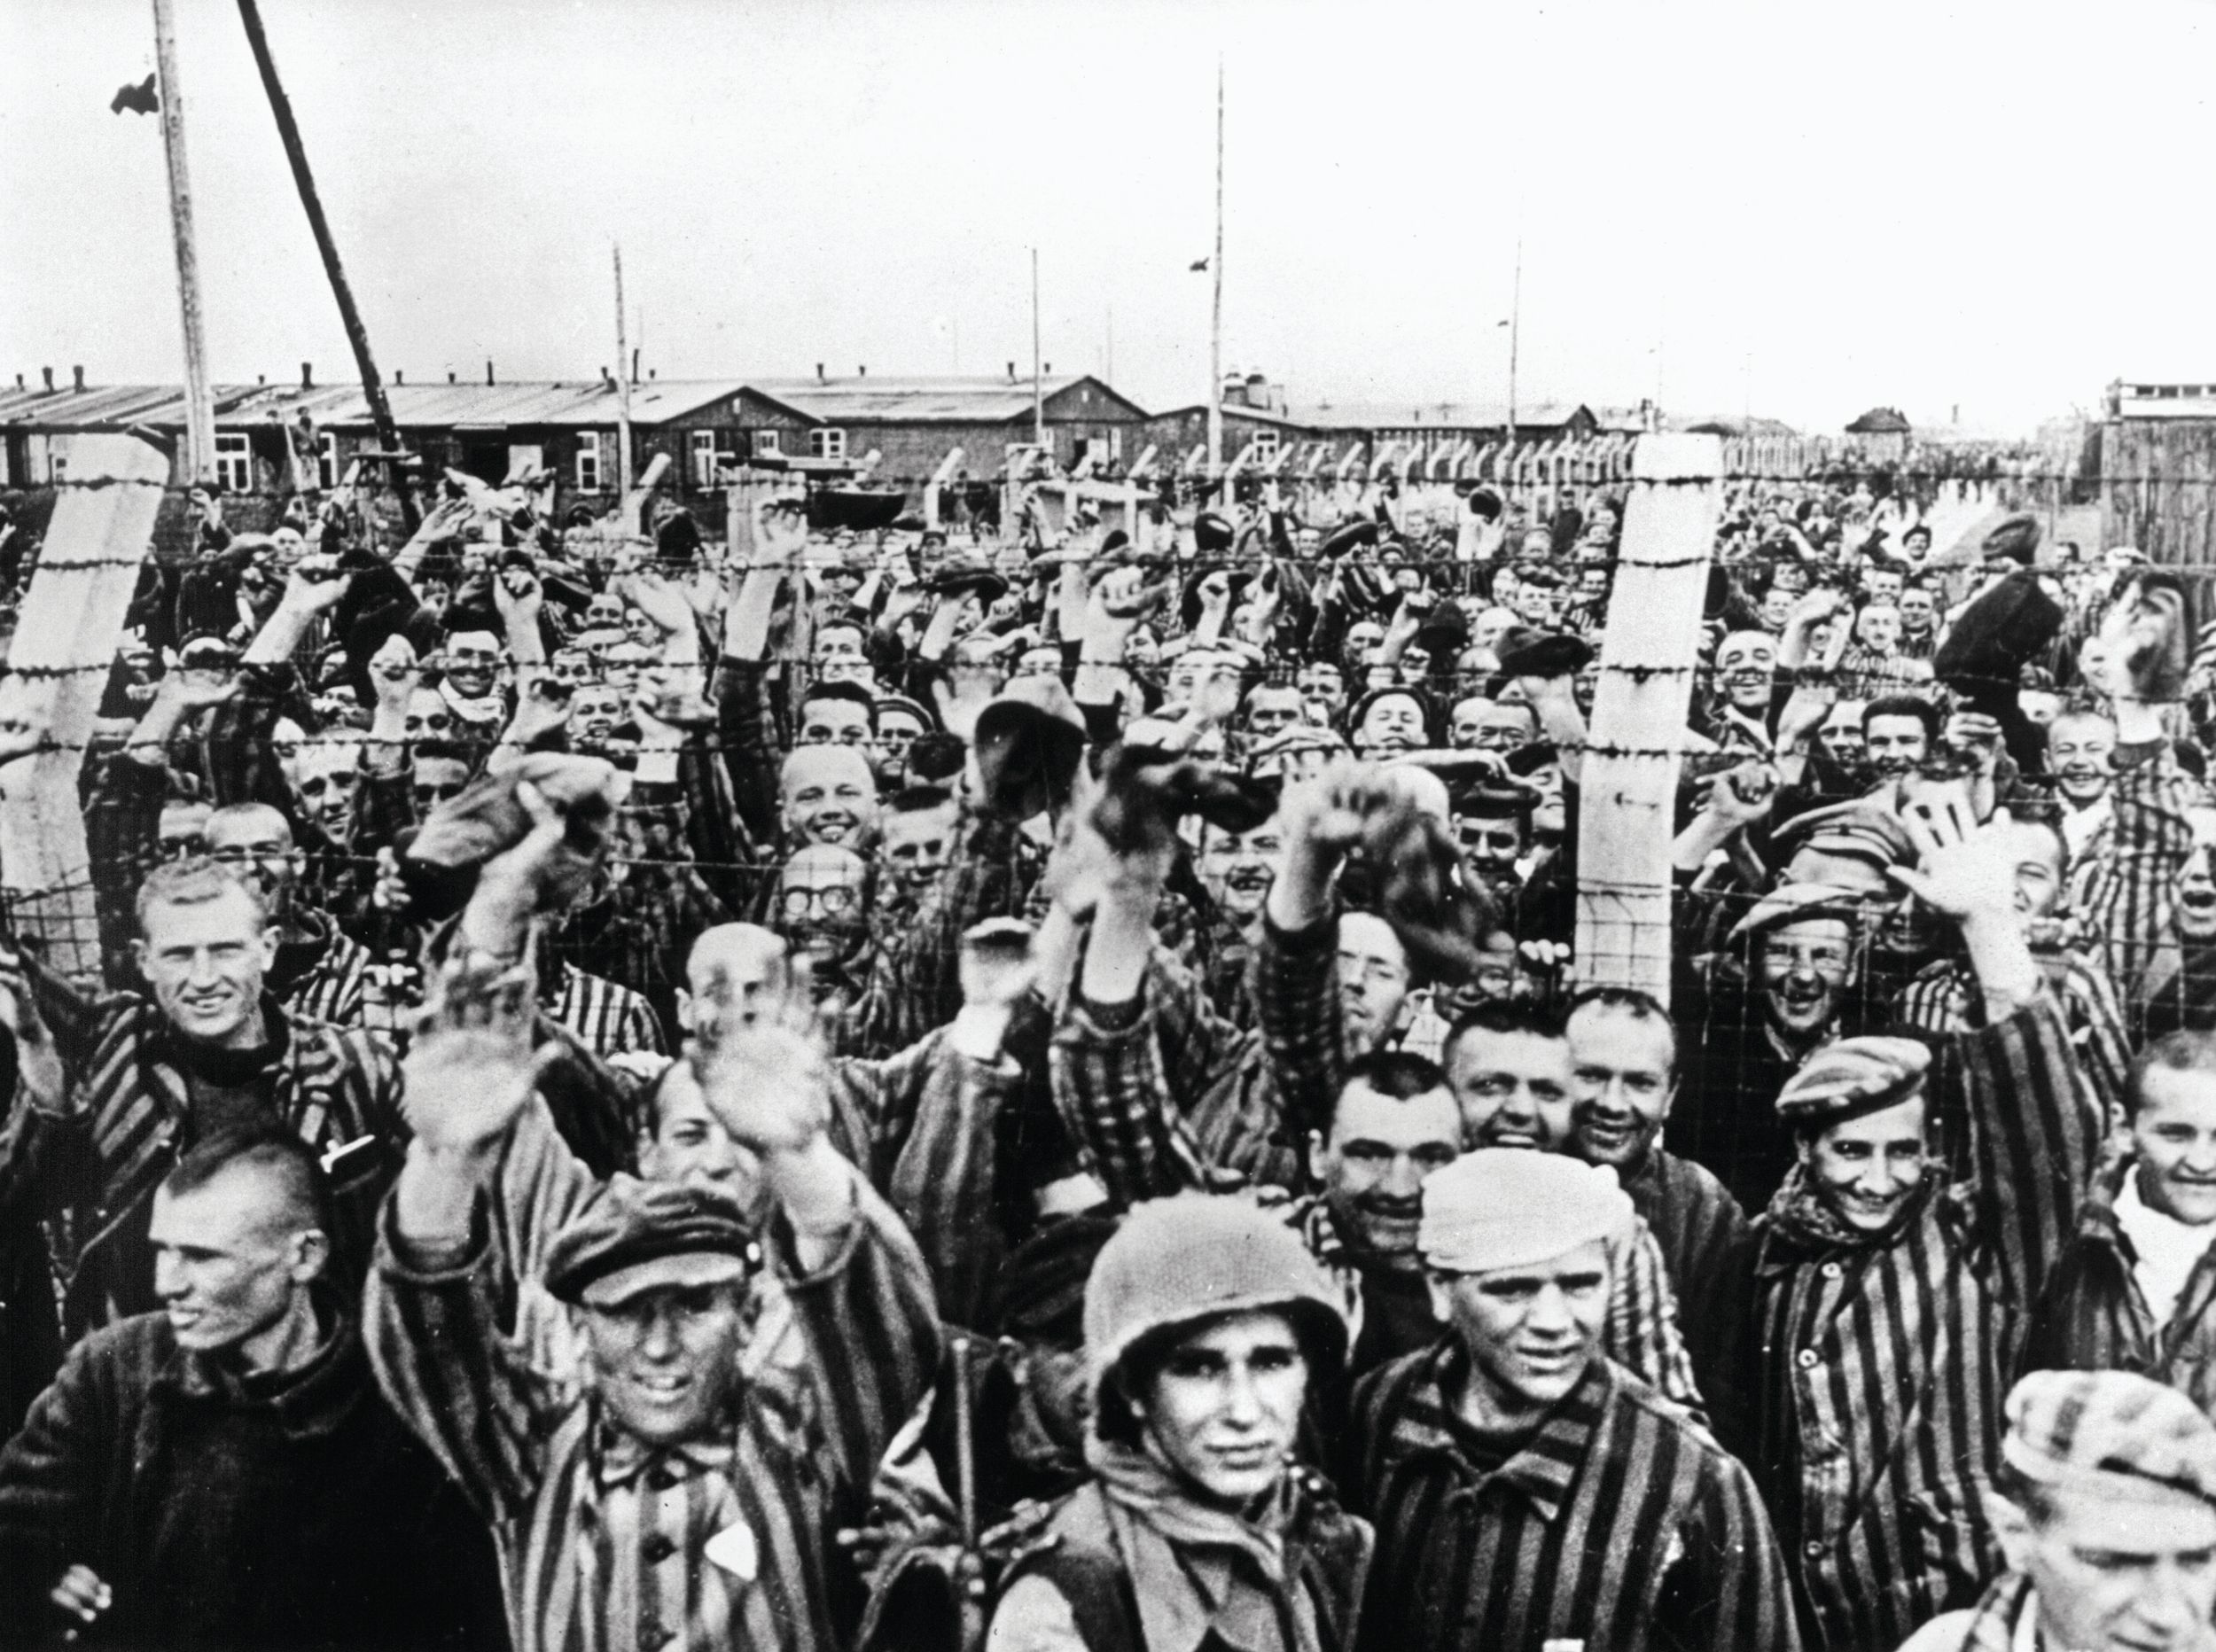 The Nazi concentration camp at Dachau was liberated by American soldiers of the 45th Infantry Division, Seventh Army, on April 30, 1945. Prisoners who were able to stand and to comprehend that the hour of deliverance had come cheered the liberators just days before the final collapse of the Third Reich.